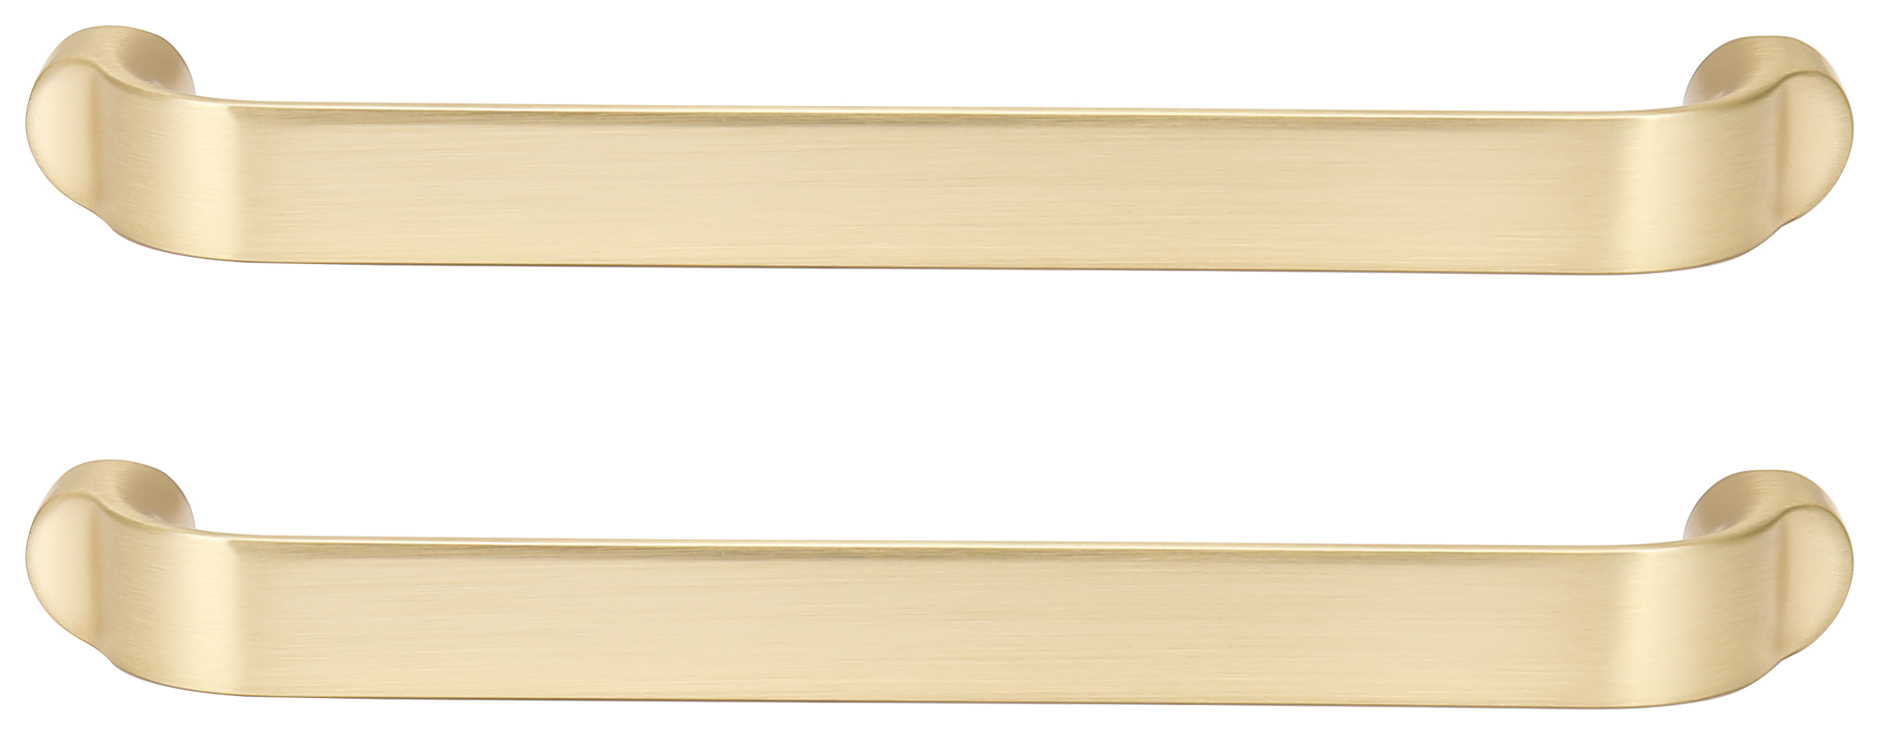 Straight Cabinet Handle Satin Brass 140mm - Pack of 2